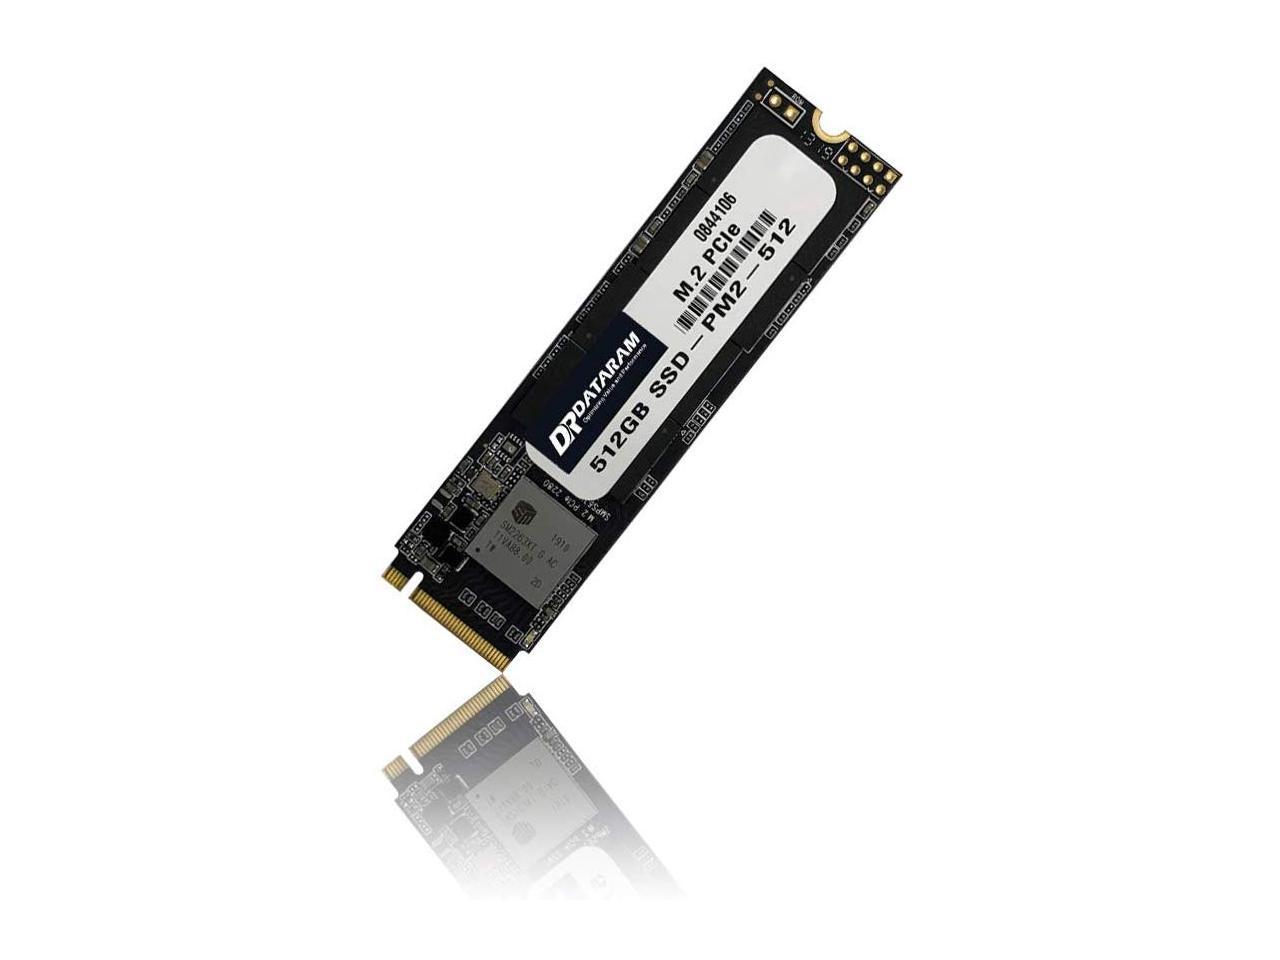 DATARAM 512GB PCIe Gen3 NVMe M.2 2280 Solid State Drive High-Performance  for PC, Laptop (SSD-PM2-512)